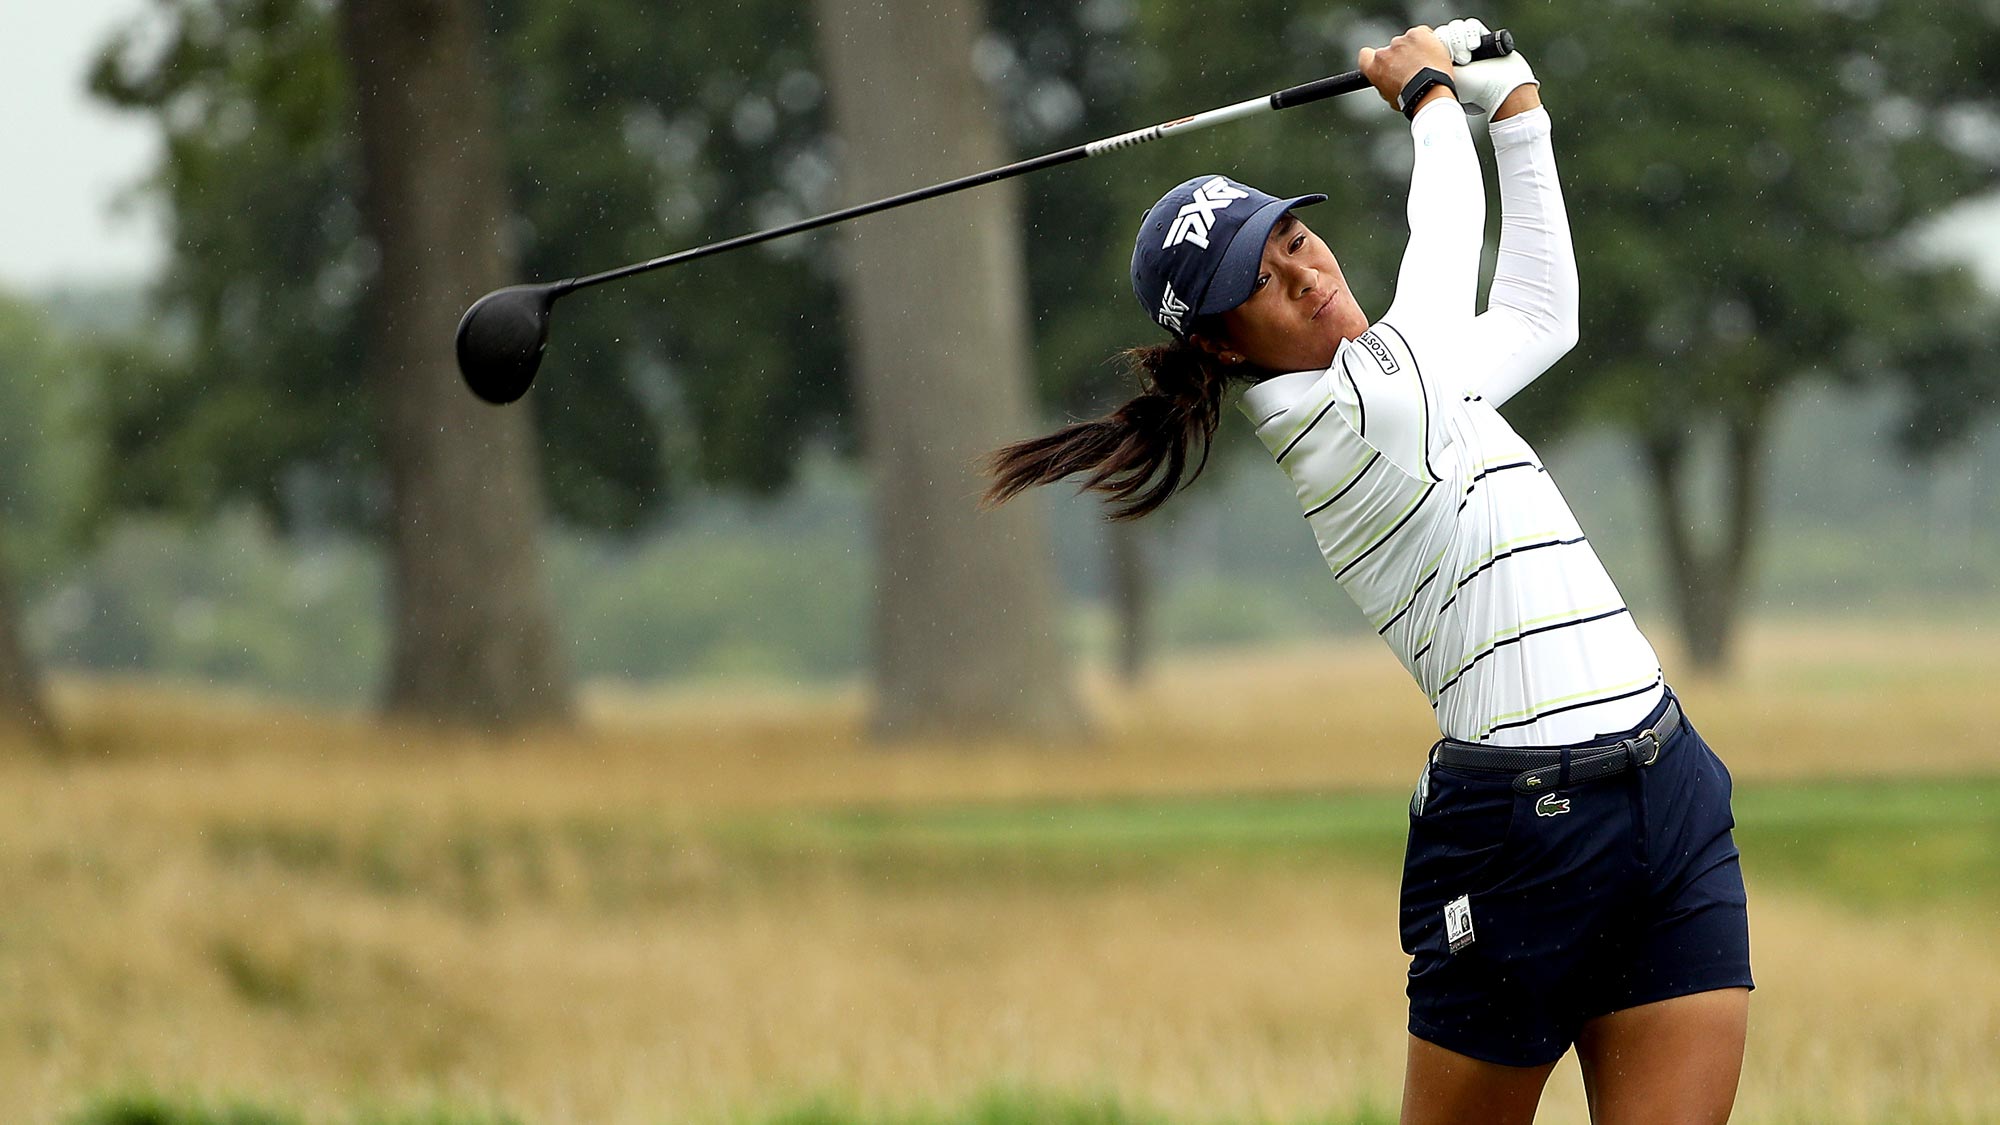 Celine Boutier Continues her Great 2020 Play at LPGA Drive On - Lpga Leaderboard Today